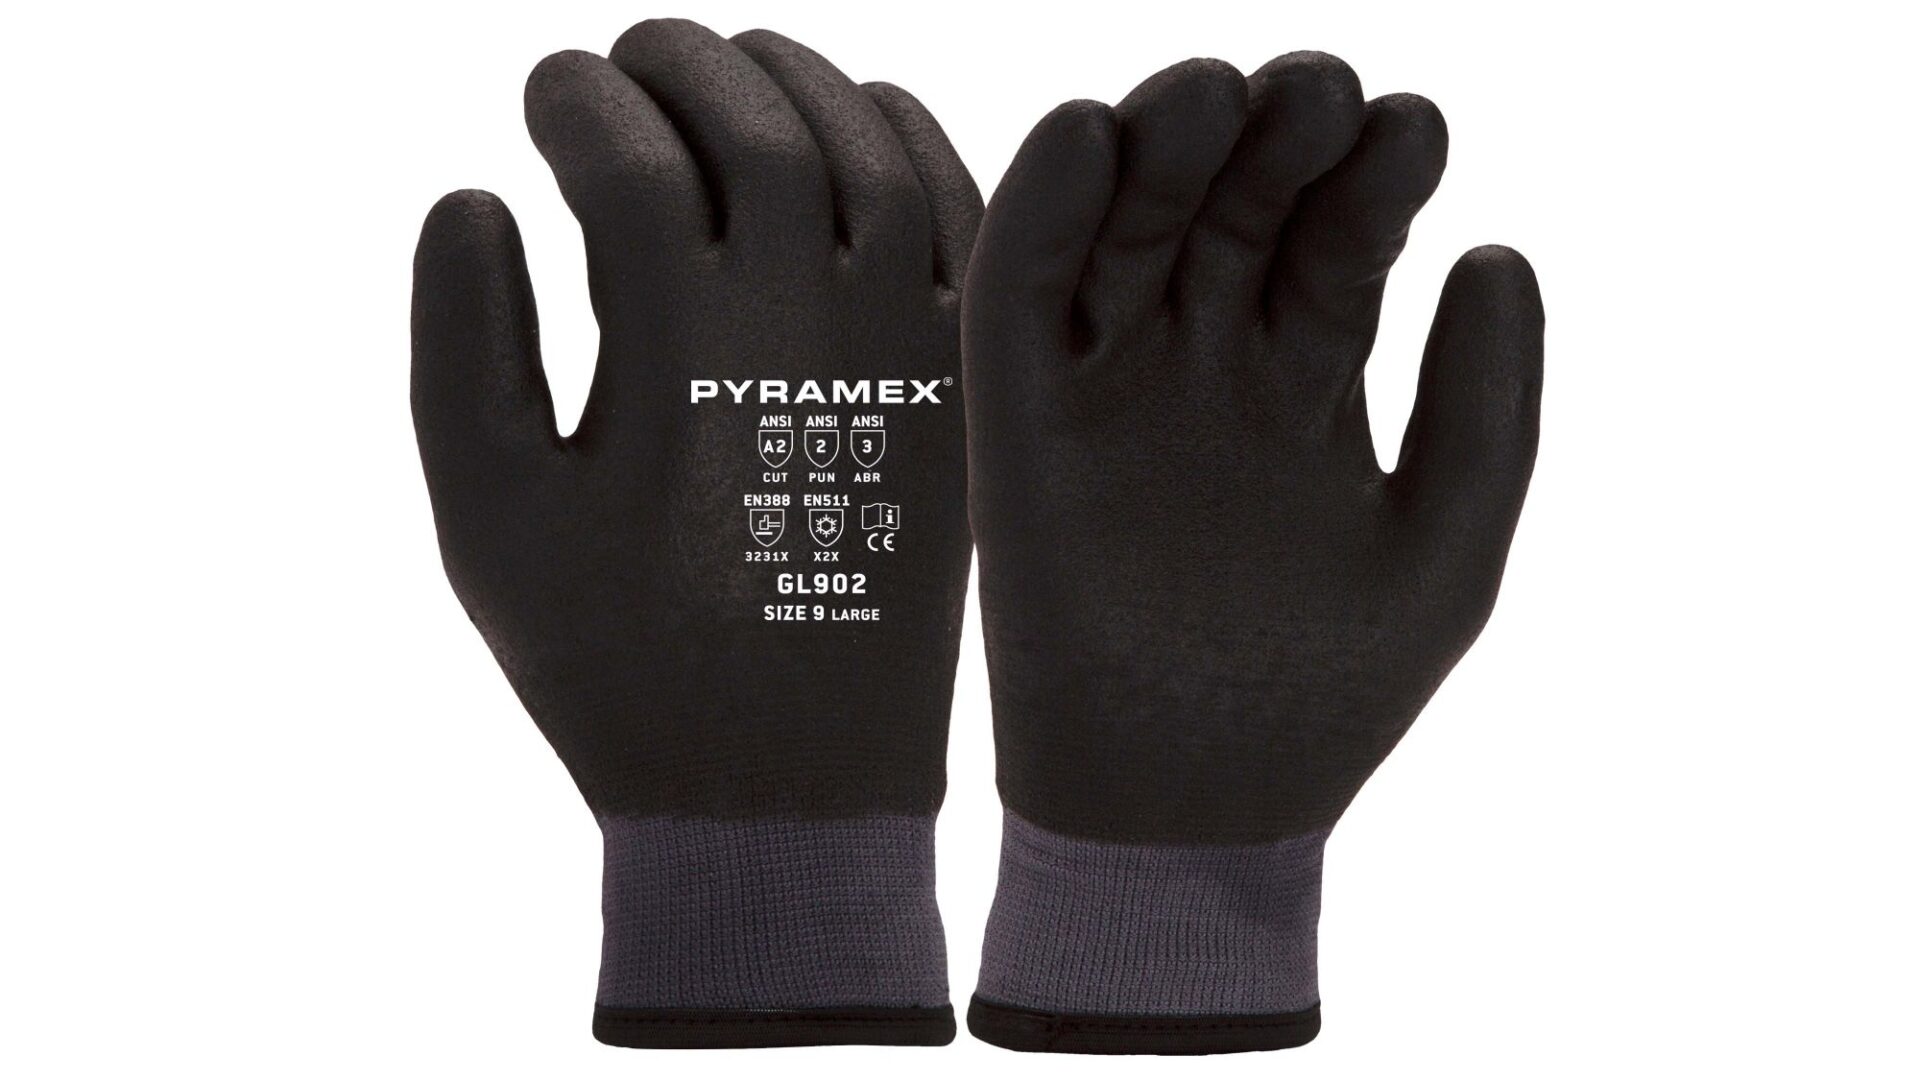 A Full Black Color Gloves With Grey Band